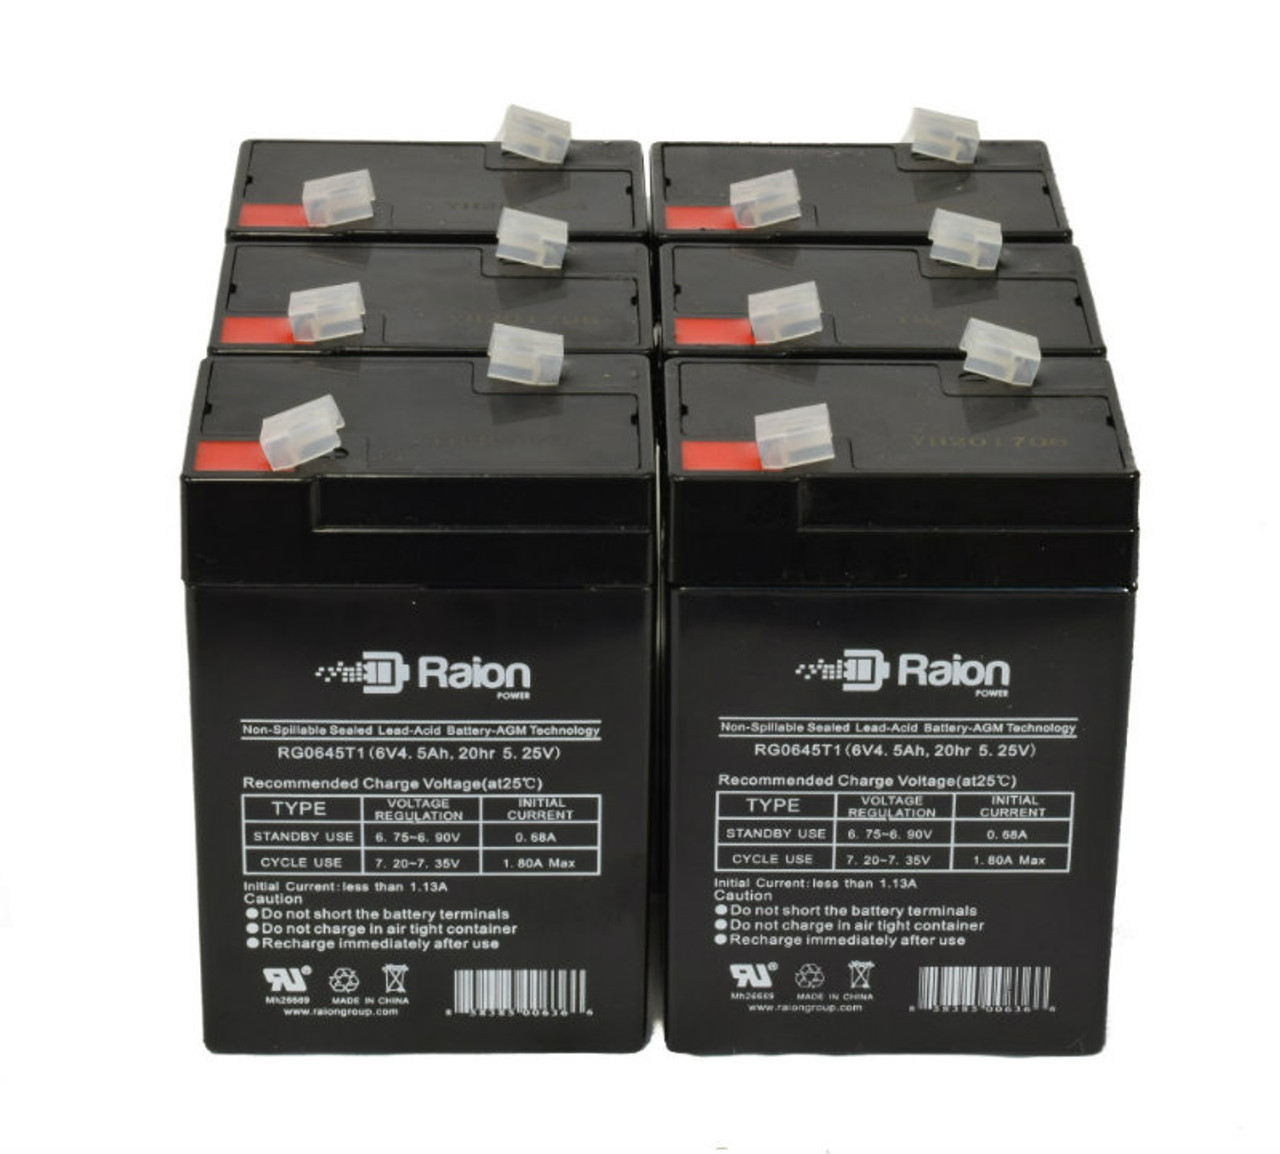 Raion Power RG0645T1 6V 4.5Ah Replacement Medical Equipment Battery for Mcgaw 821 Intelligent Pump - 6 Pack